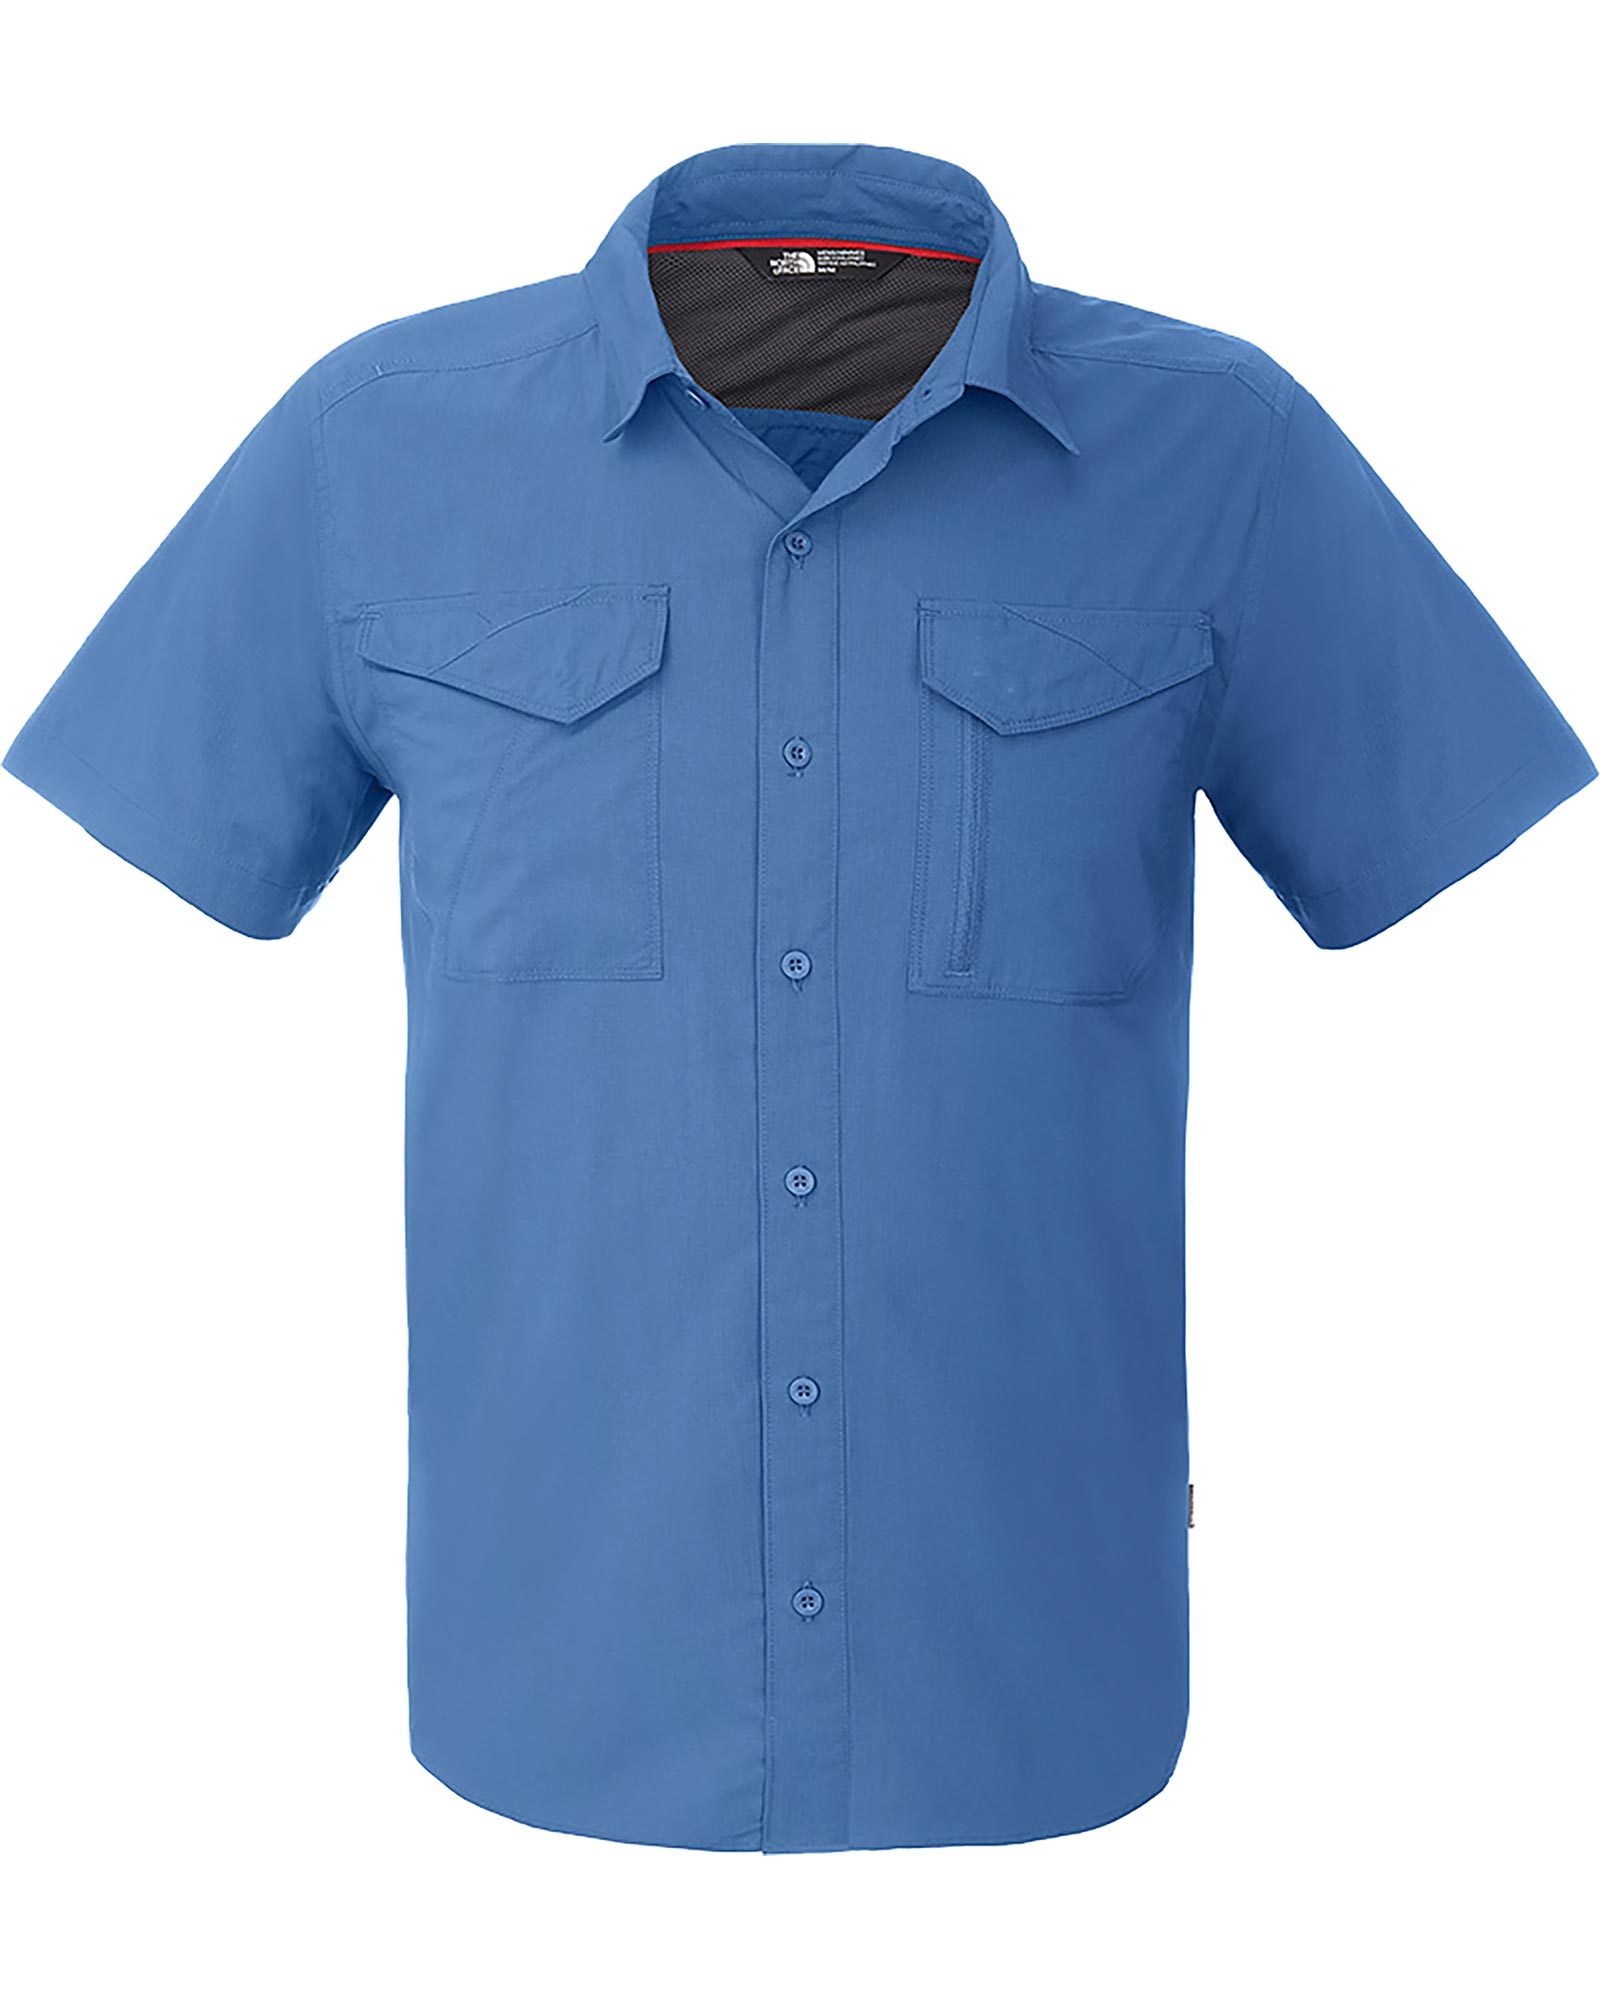 The North Face Sequoia Men’s Shirt - Ensign Blue S